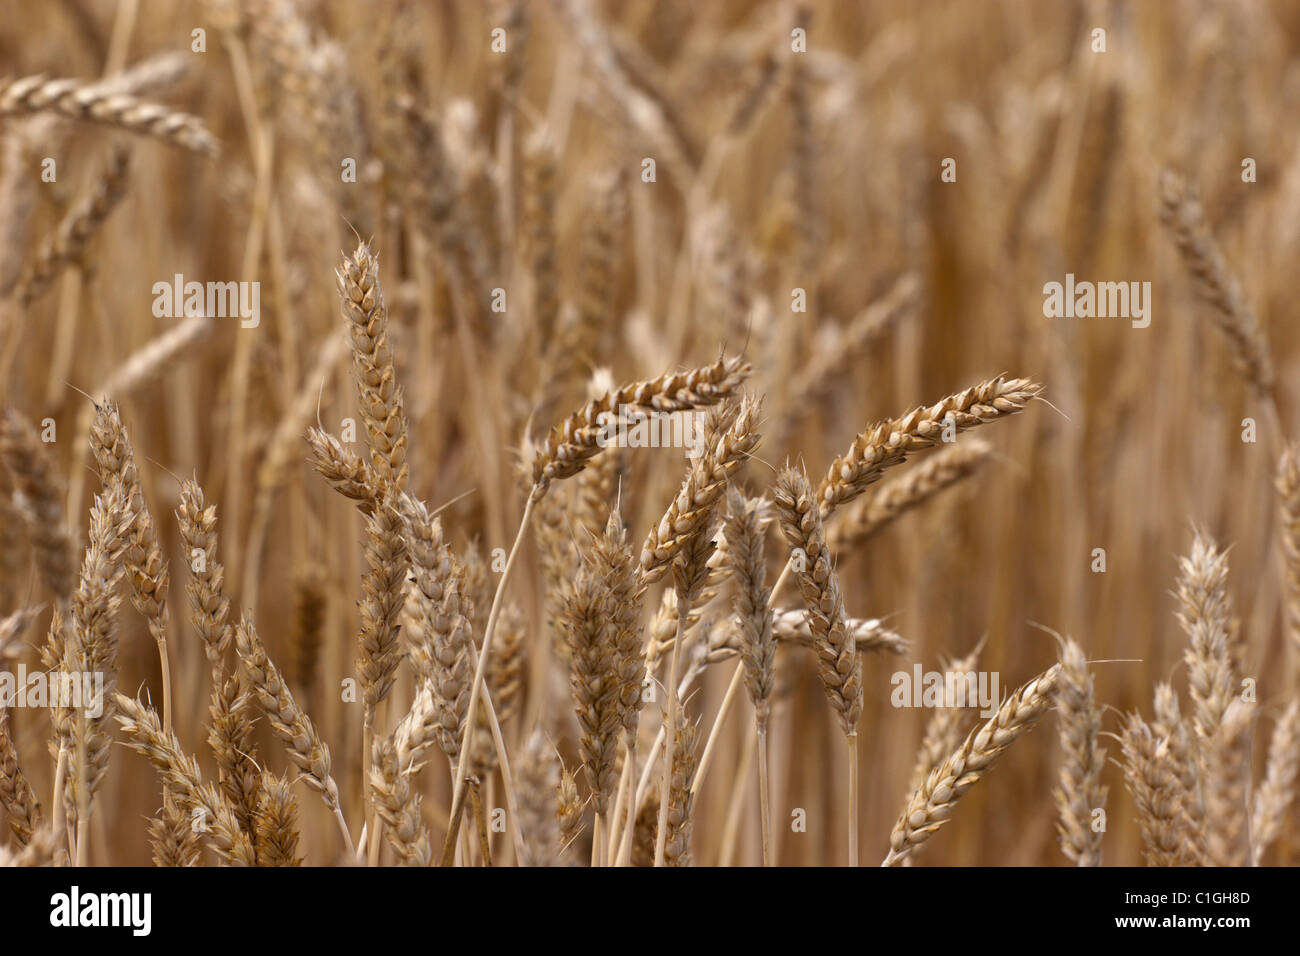 wheat field harvest golden grain cereal crop agriculture farming Stock Photo